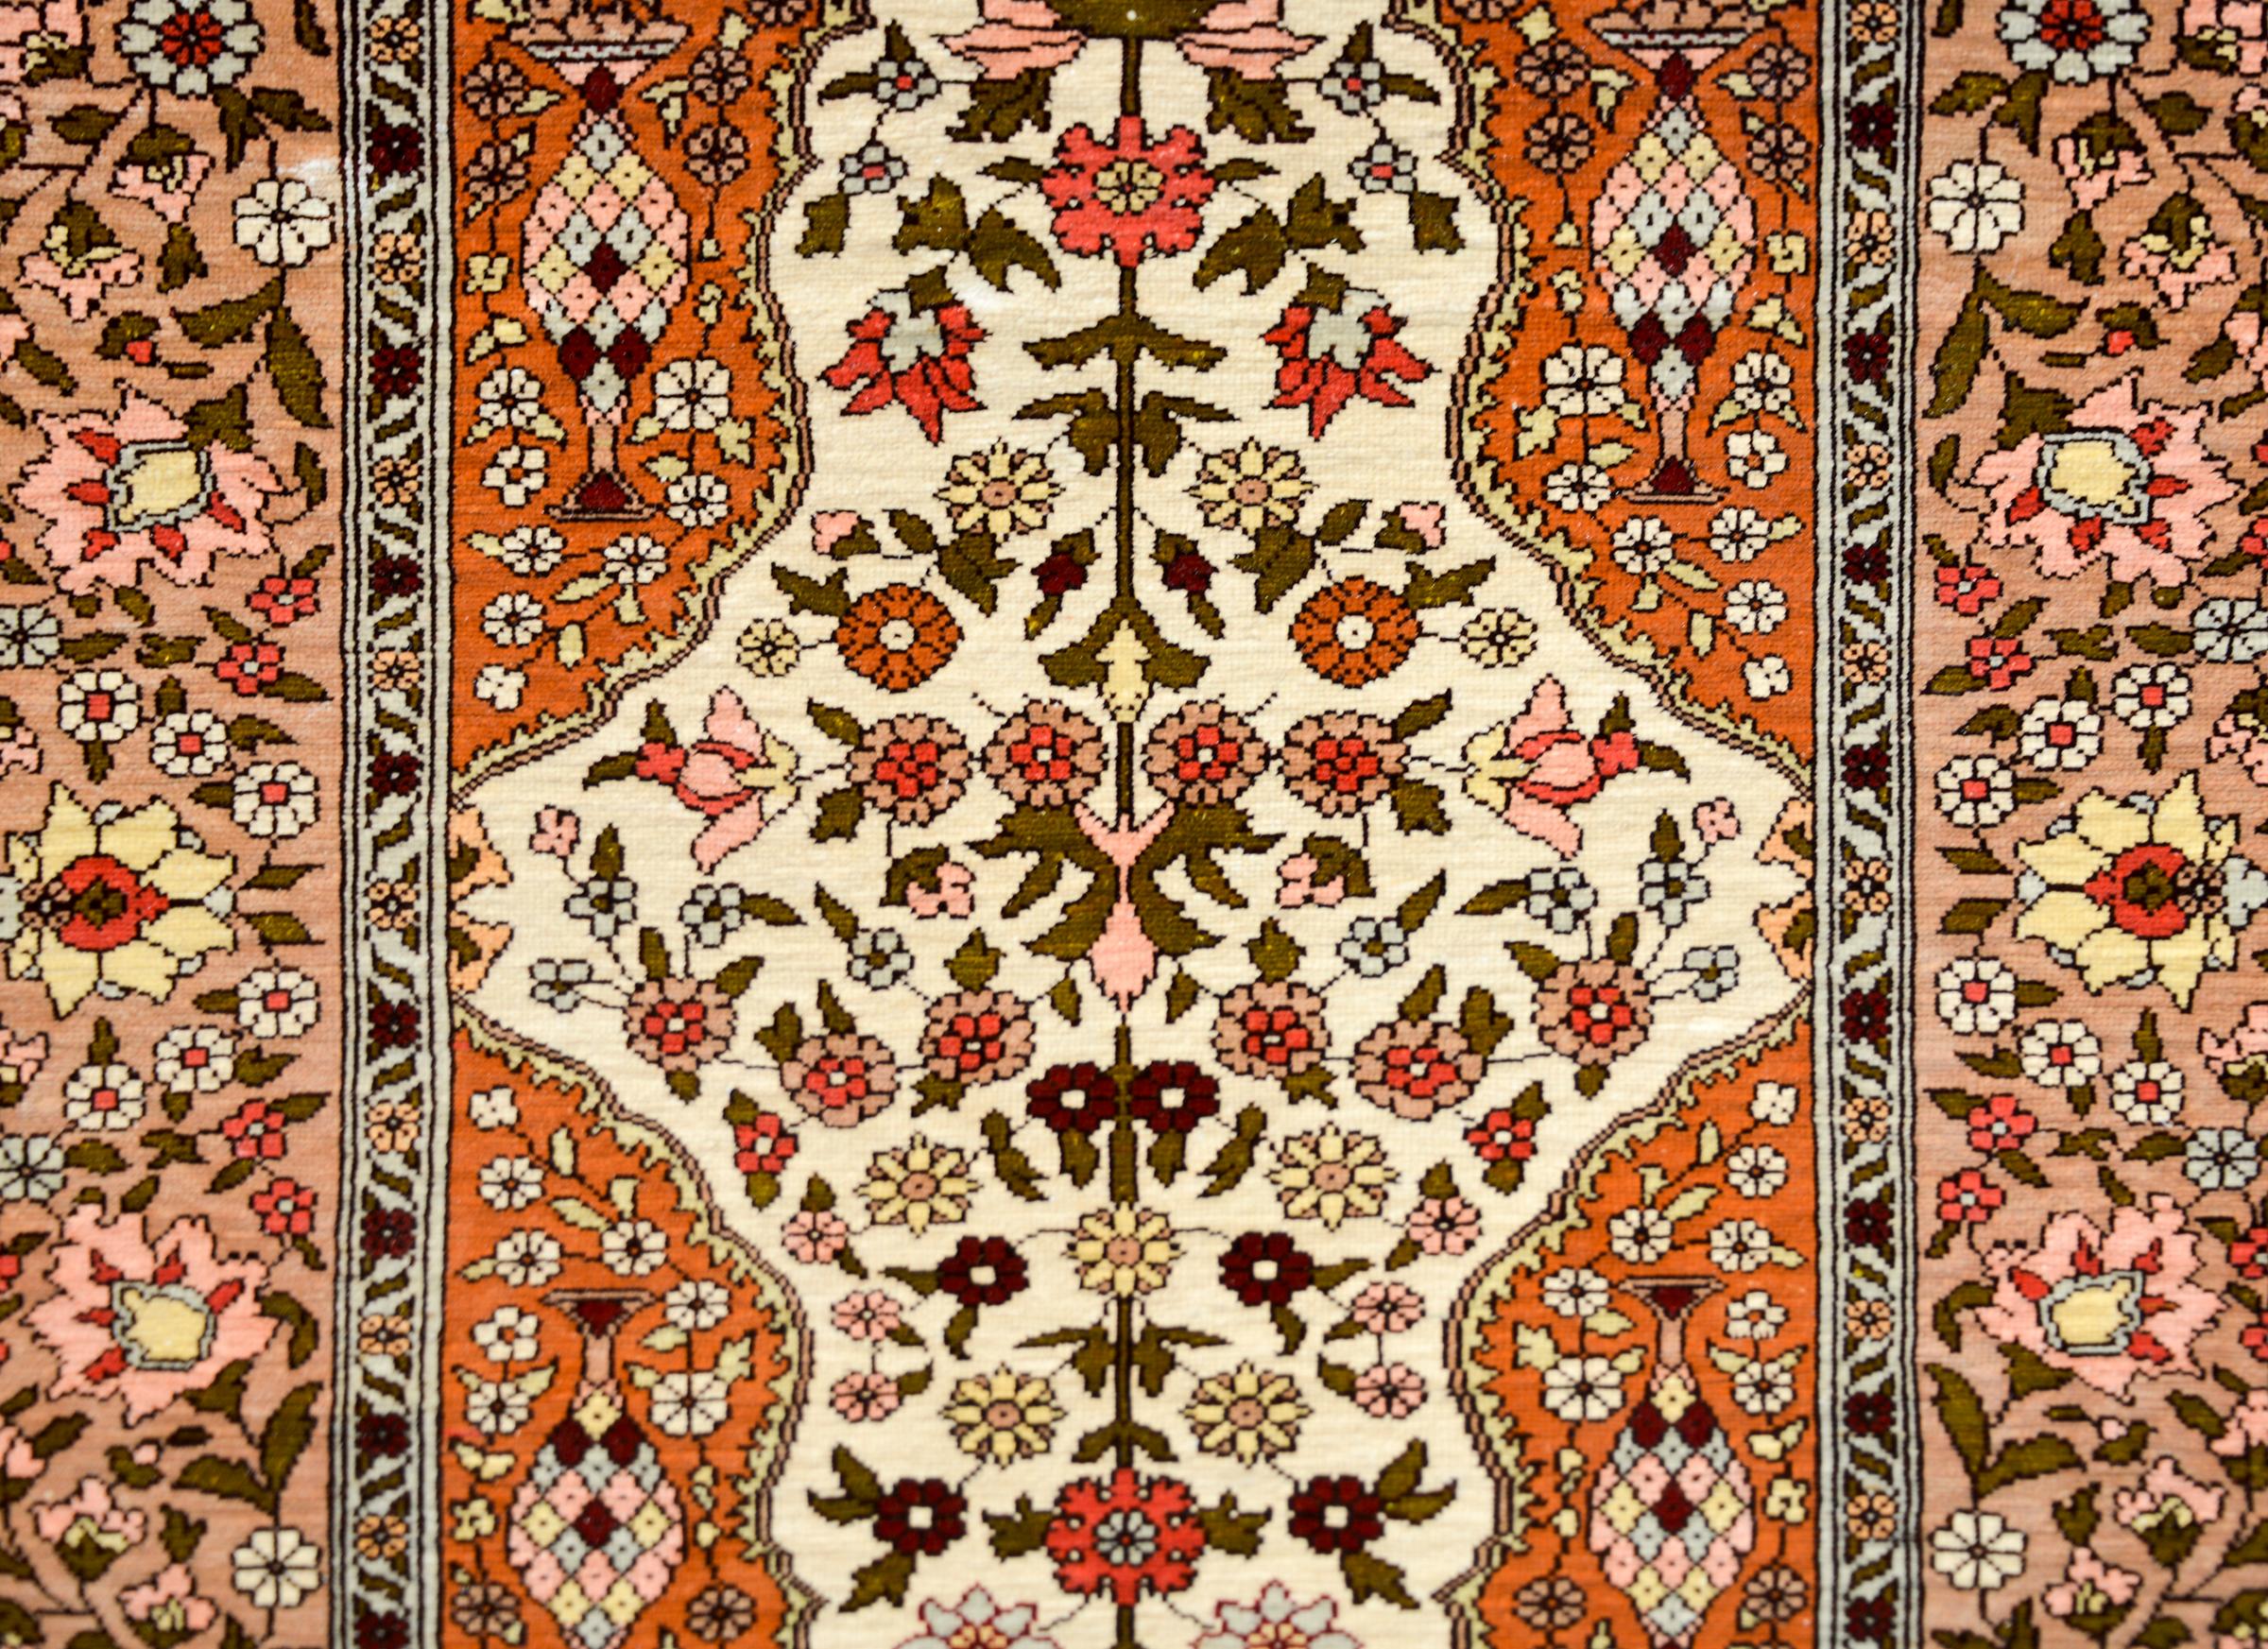 A brilliant vintage silk Turkish Hereke rug woven with a central medallion with a mirrored floral pattern woven in pink, crimson, yellow, and dark green, against a cream colored background, and amidst a field of flowers, and surrounded by a